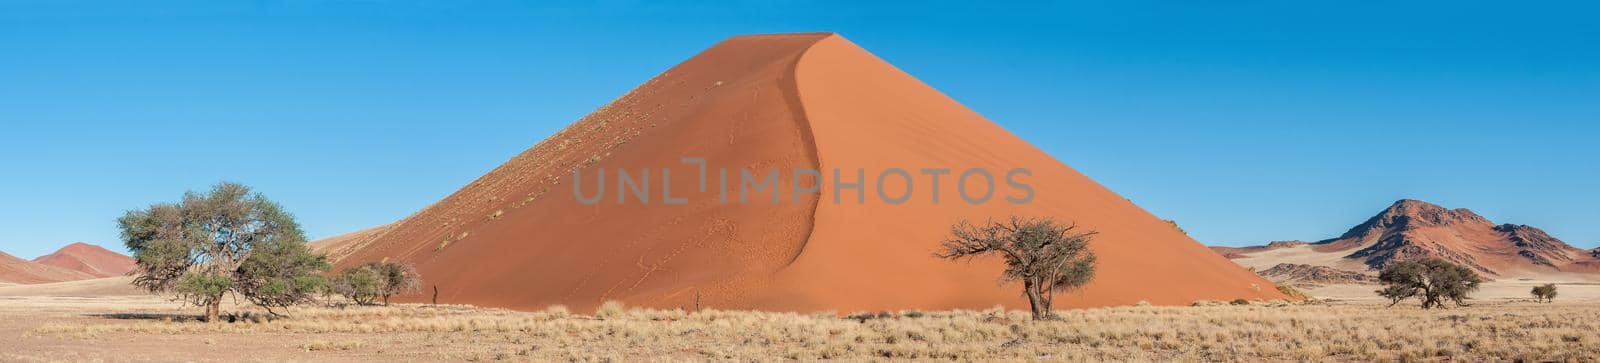 Panoramic dune landscape between Sesriem and Sossusvlei in Namibia. Trees are visible